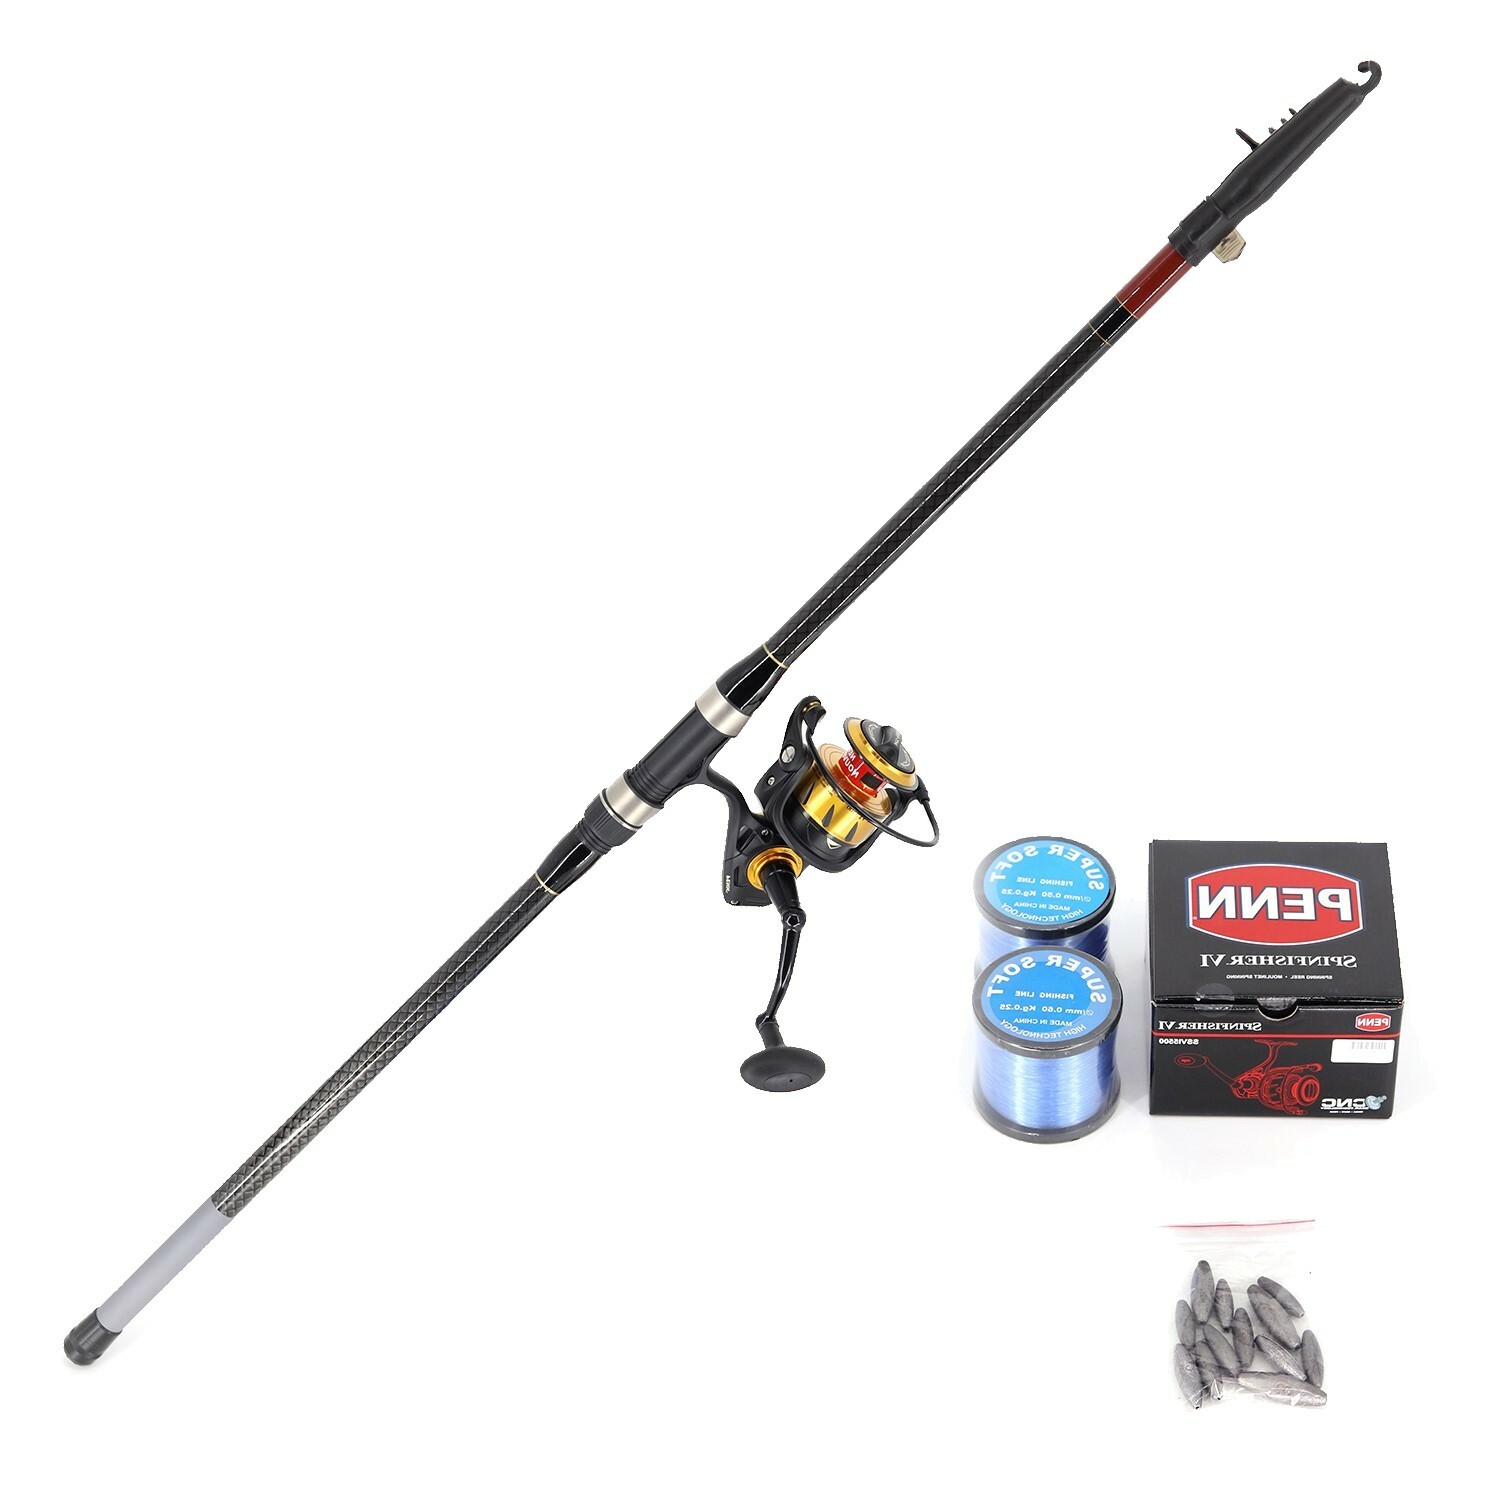 Shore Fishing (Pilot 3m and Penn VI 5500 including Nylon line with rigs and sinkers and snap swivels) Combo